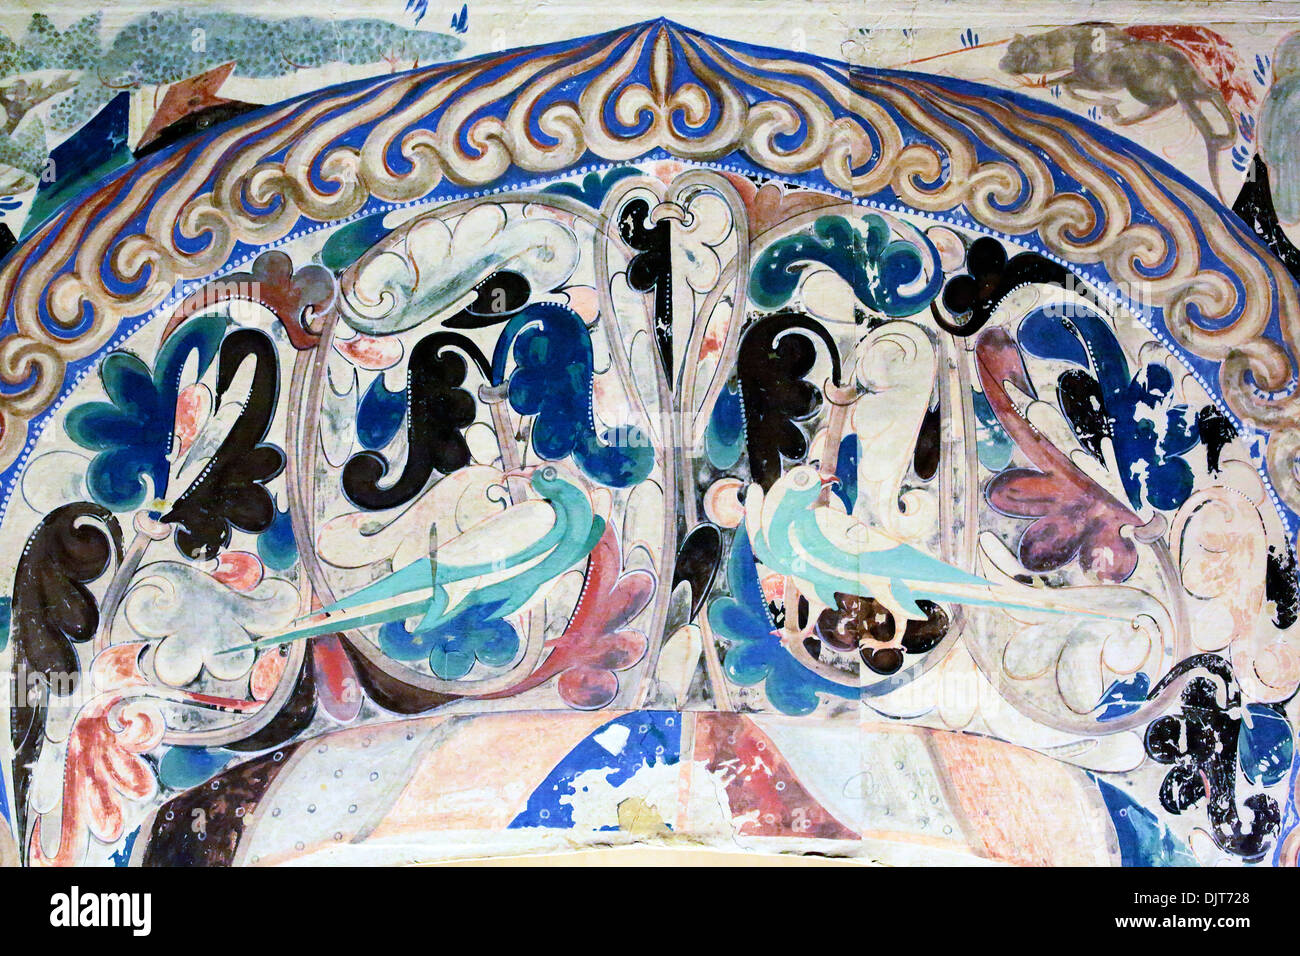 Mural painting, Mogao Caves museum, Dunhuang, Gansu province, China Stock Photo